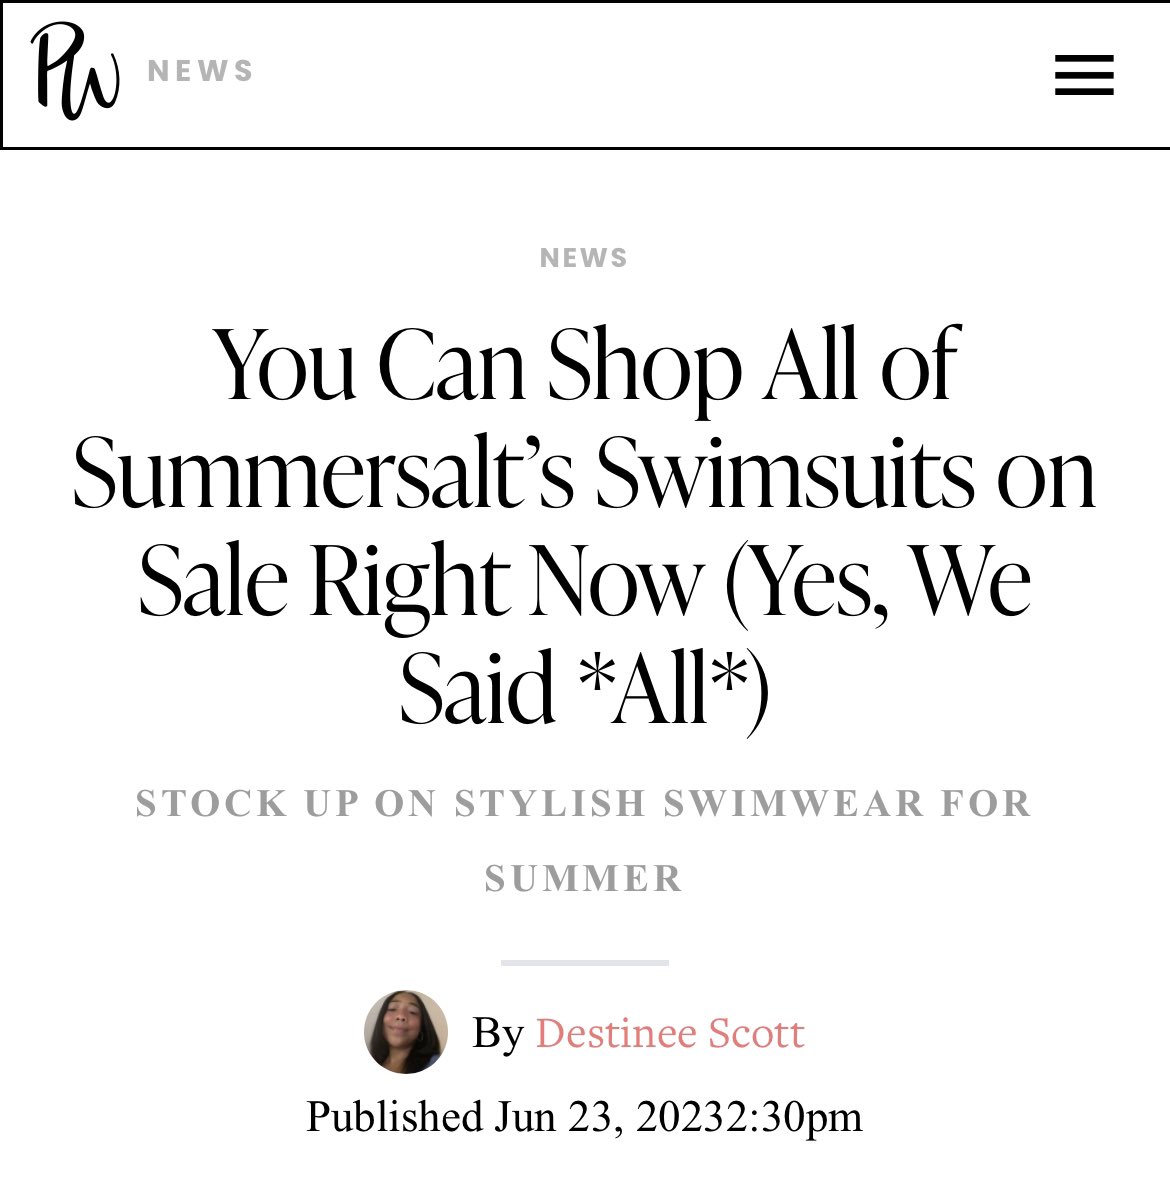 Thank you @PureWow & Destinee Scott for featuring our Annual Warehouse Sale in your recent article! ☀️ Shop 30% off: summersalt.com Read the article: purewow.com/news/summersal… @loritcoulter @reshmacc